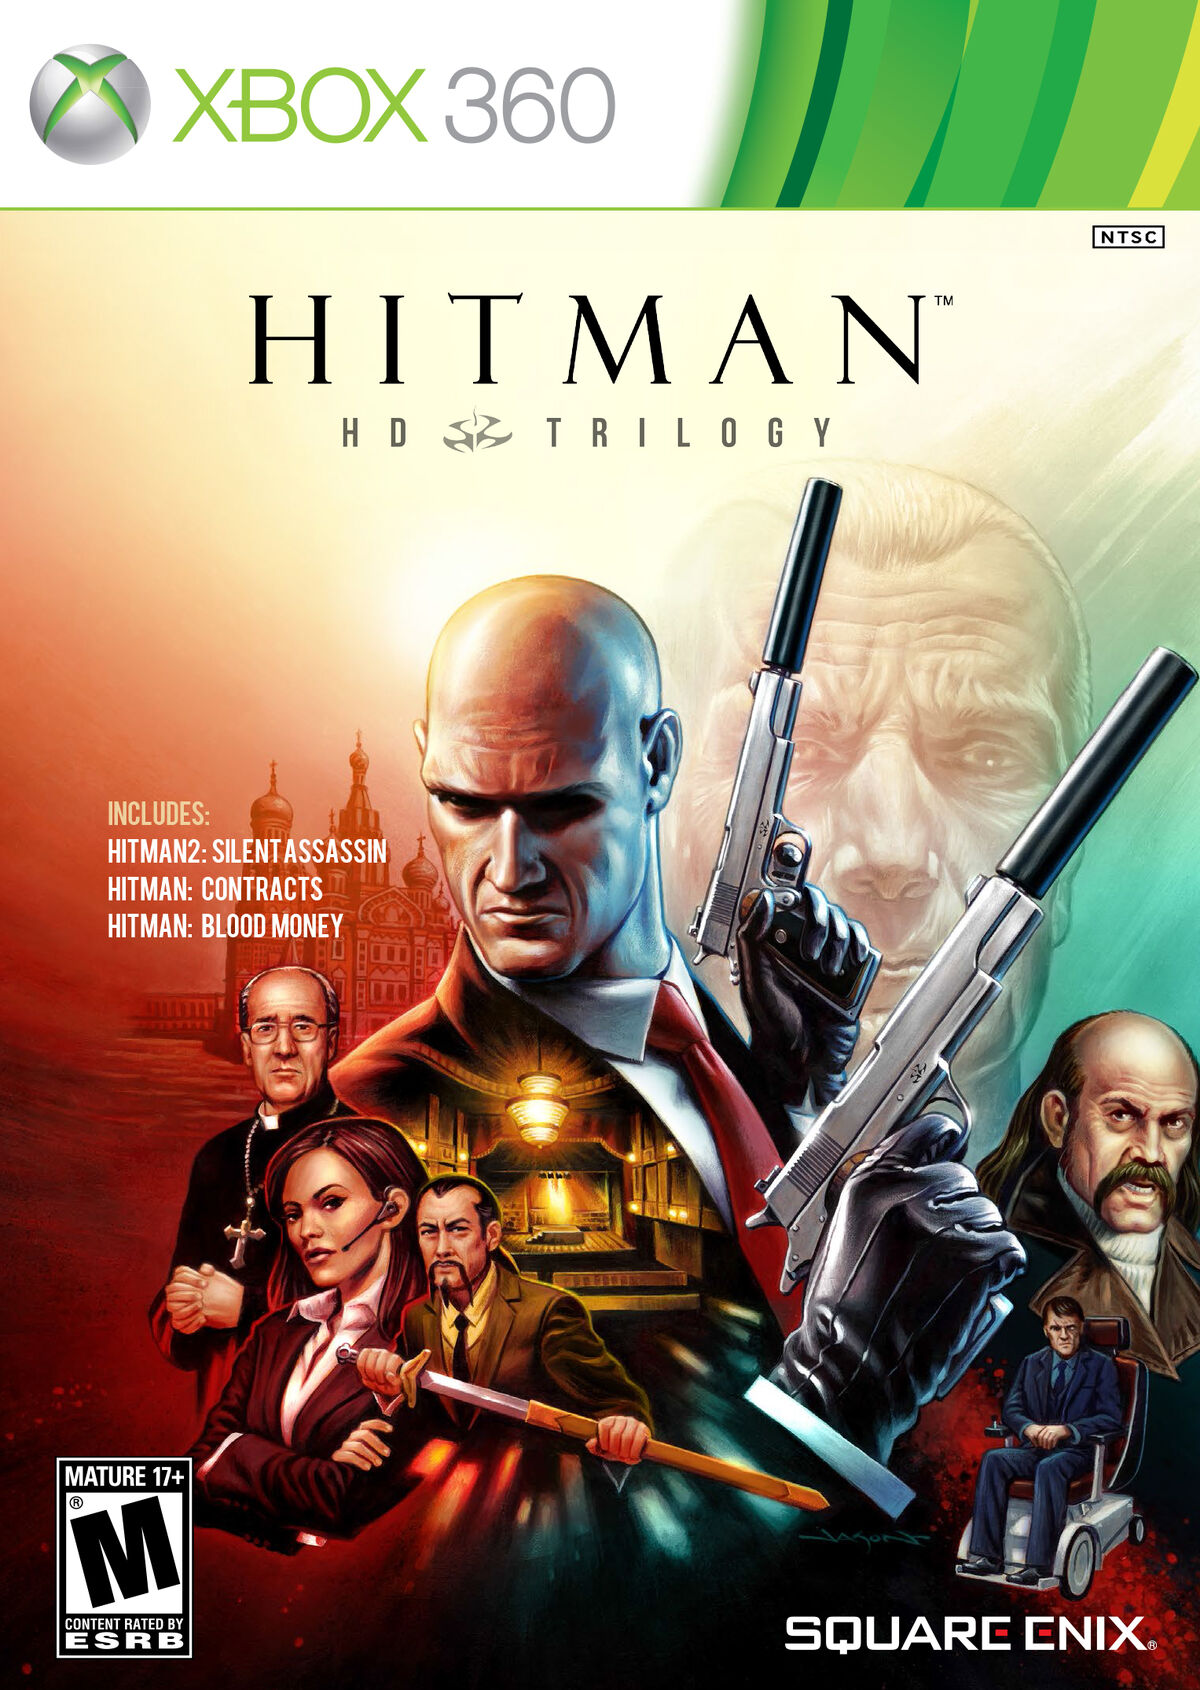 I made some Album Covers for the HITMAN Trilogy because the ones that came  with the Deluxe Edition of HITMAN III were very low quality. Also, couldn't  choose between what image to